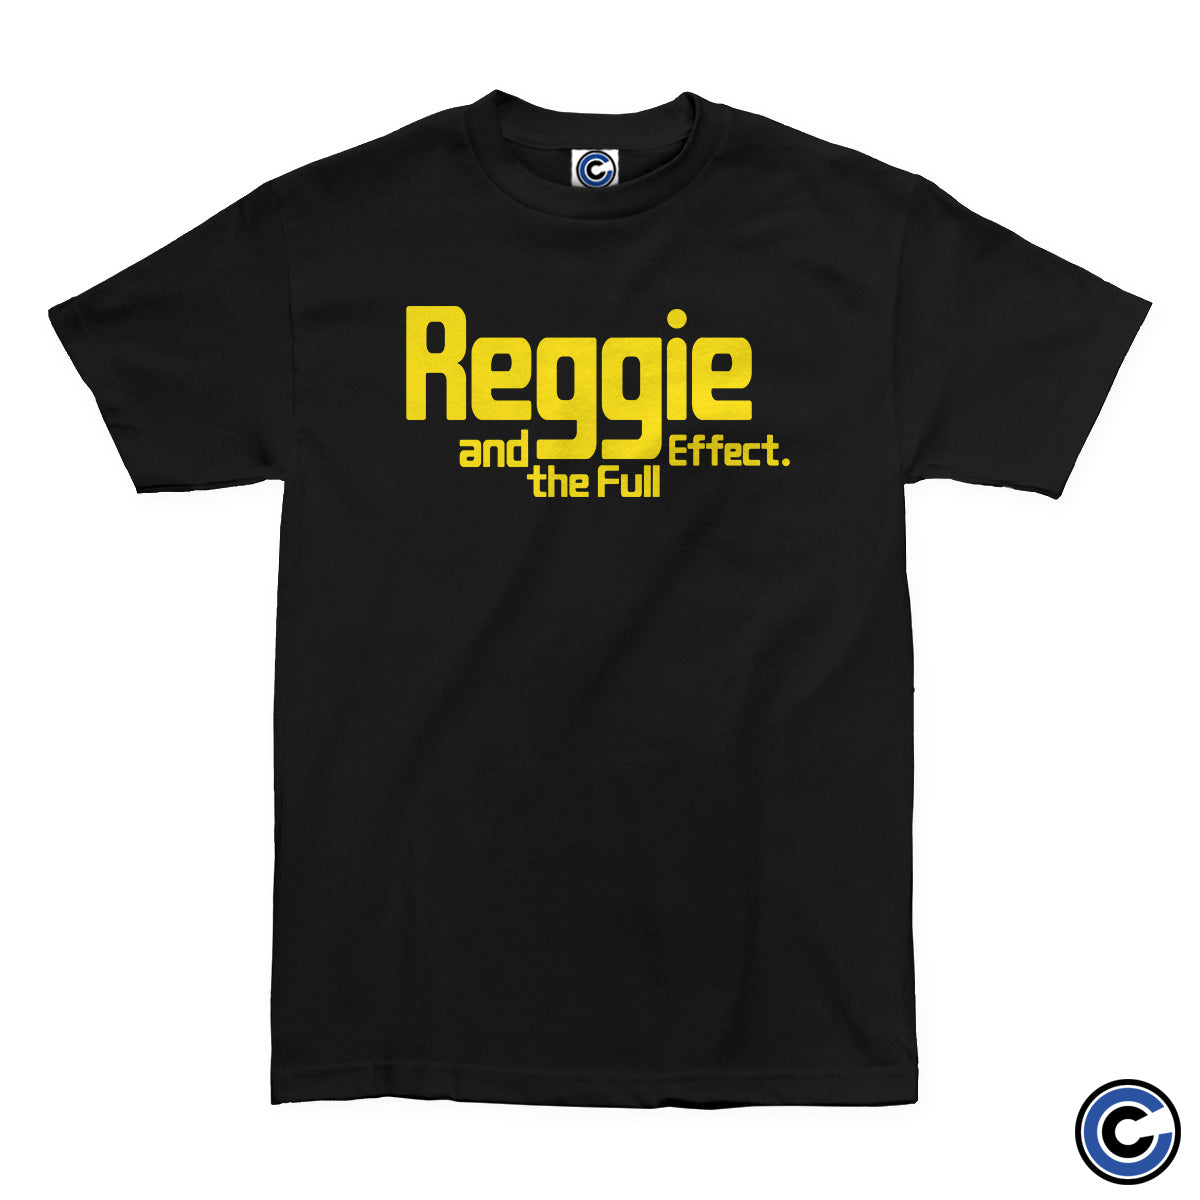 Reggie and the Full Effect "Stacked" Shirt